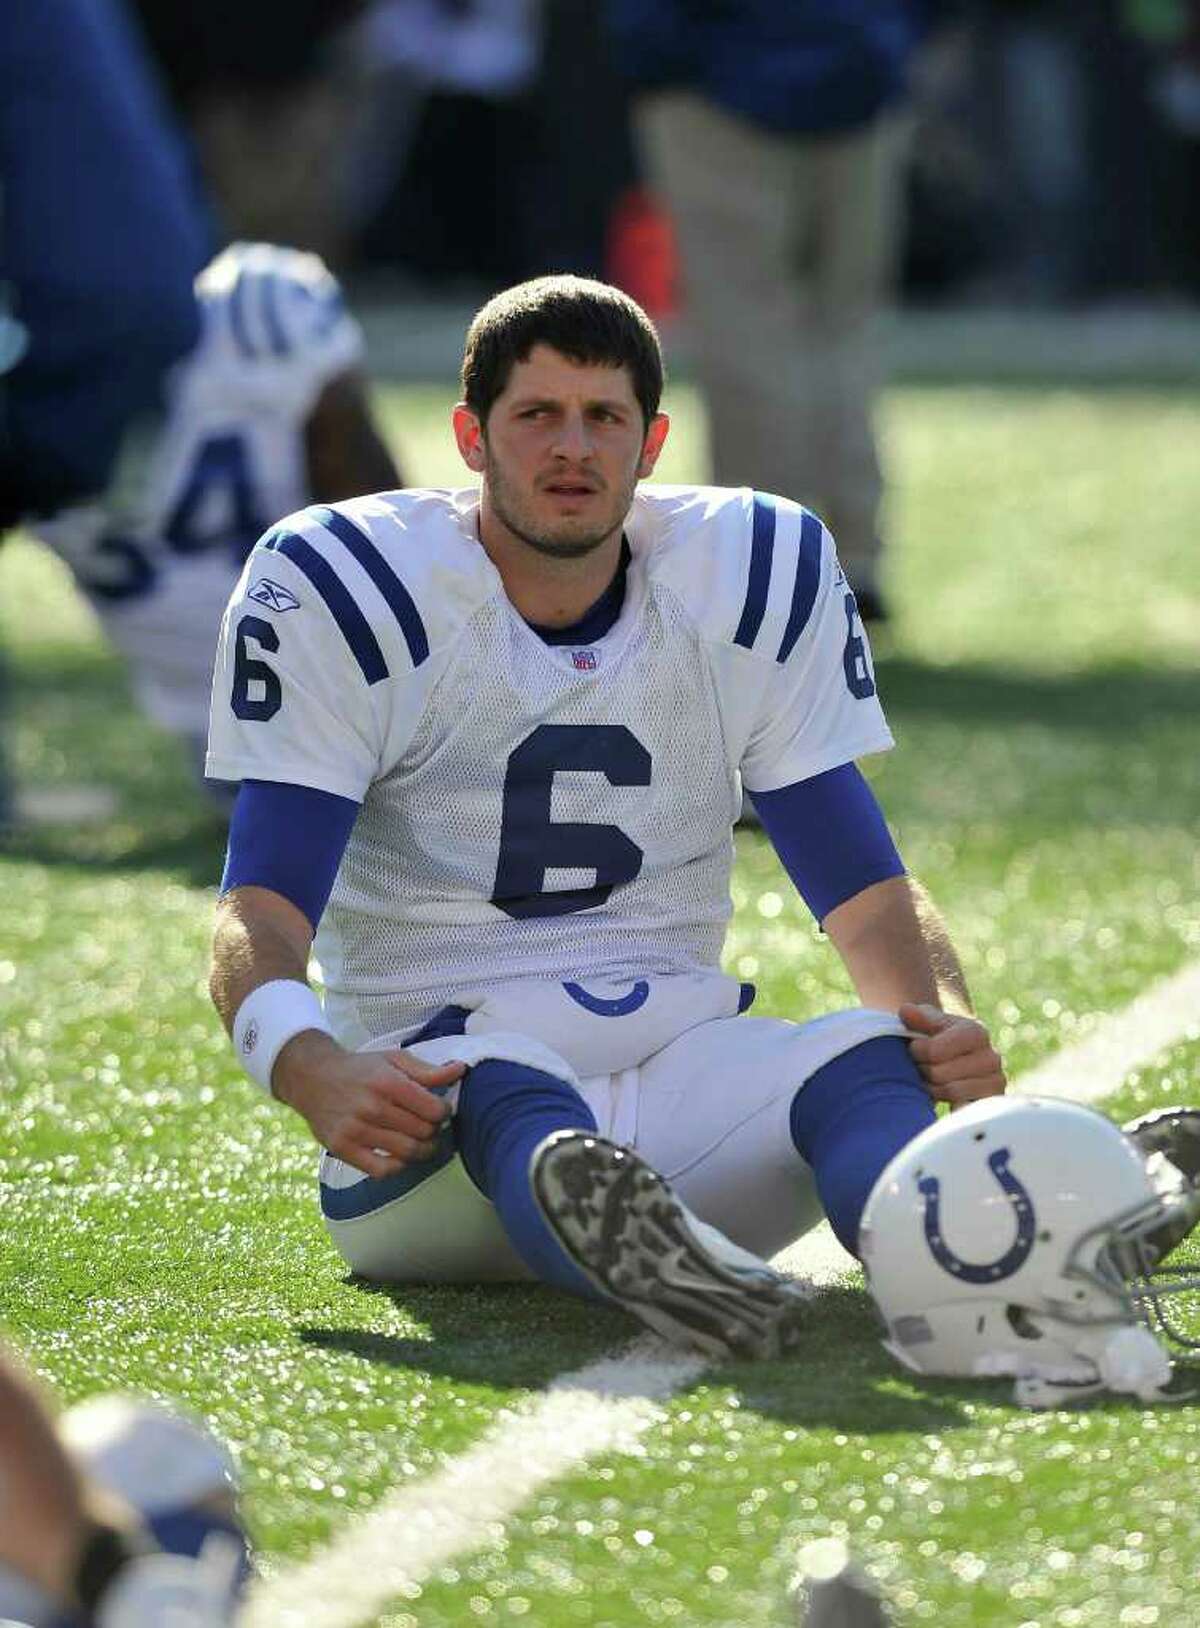 Indianapolis Colts quarterback Dan Orlovsky warms up before an NFL football game against the Baltimore Ravens in Baltimore, Sunday, Dec. 11, 2011. (AP Photo/Gail Burton)